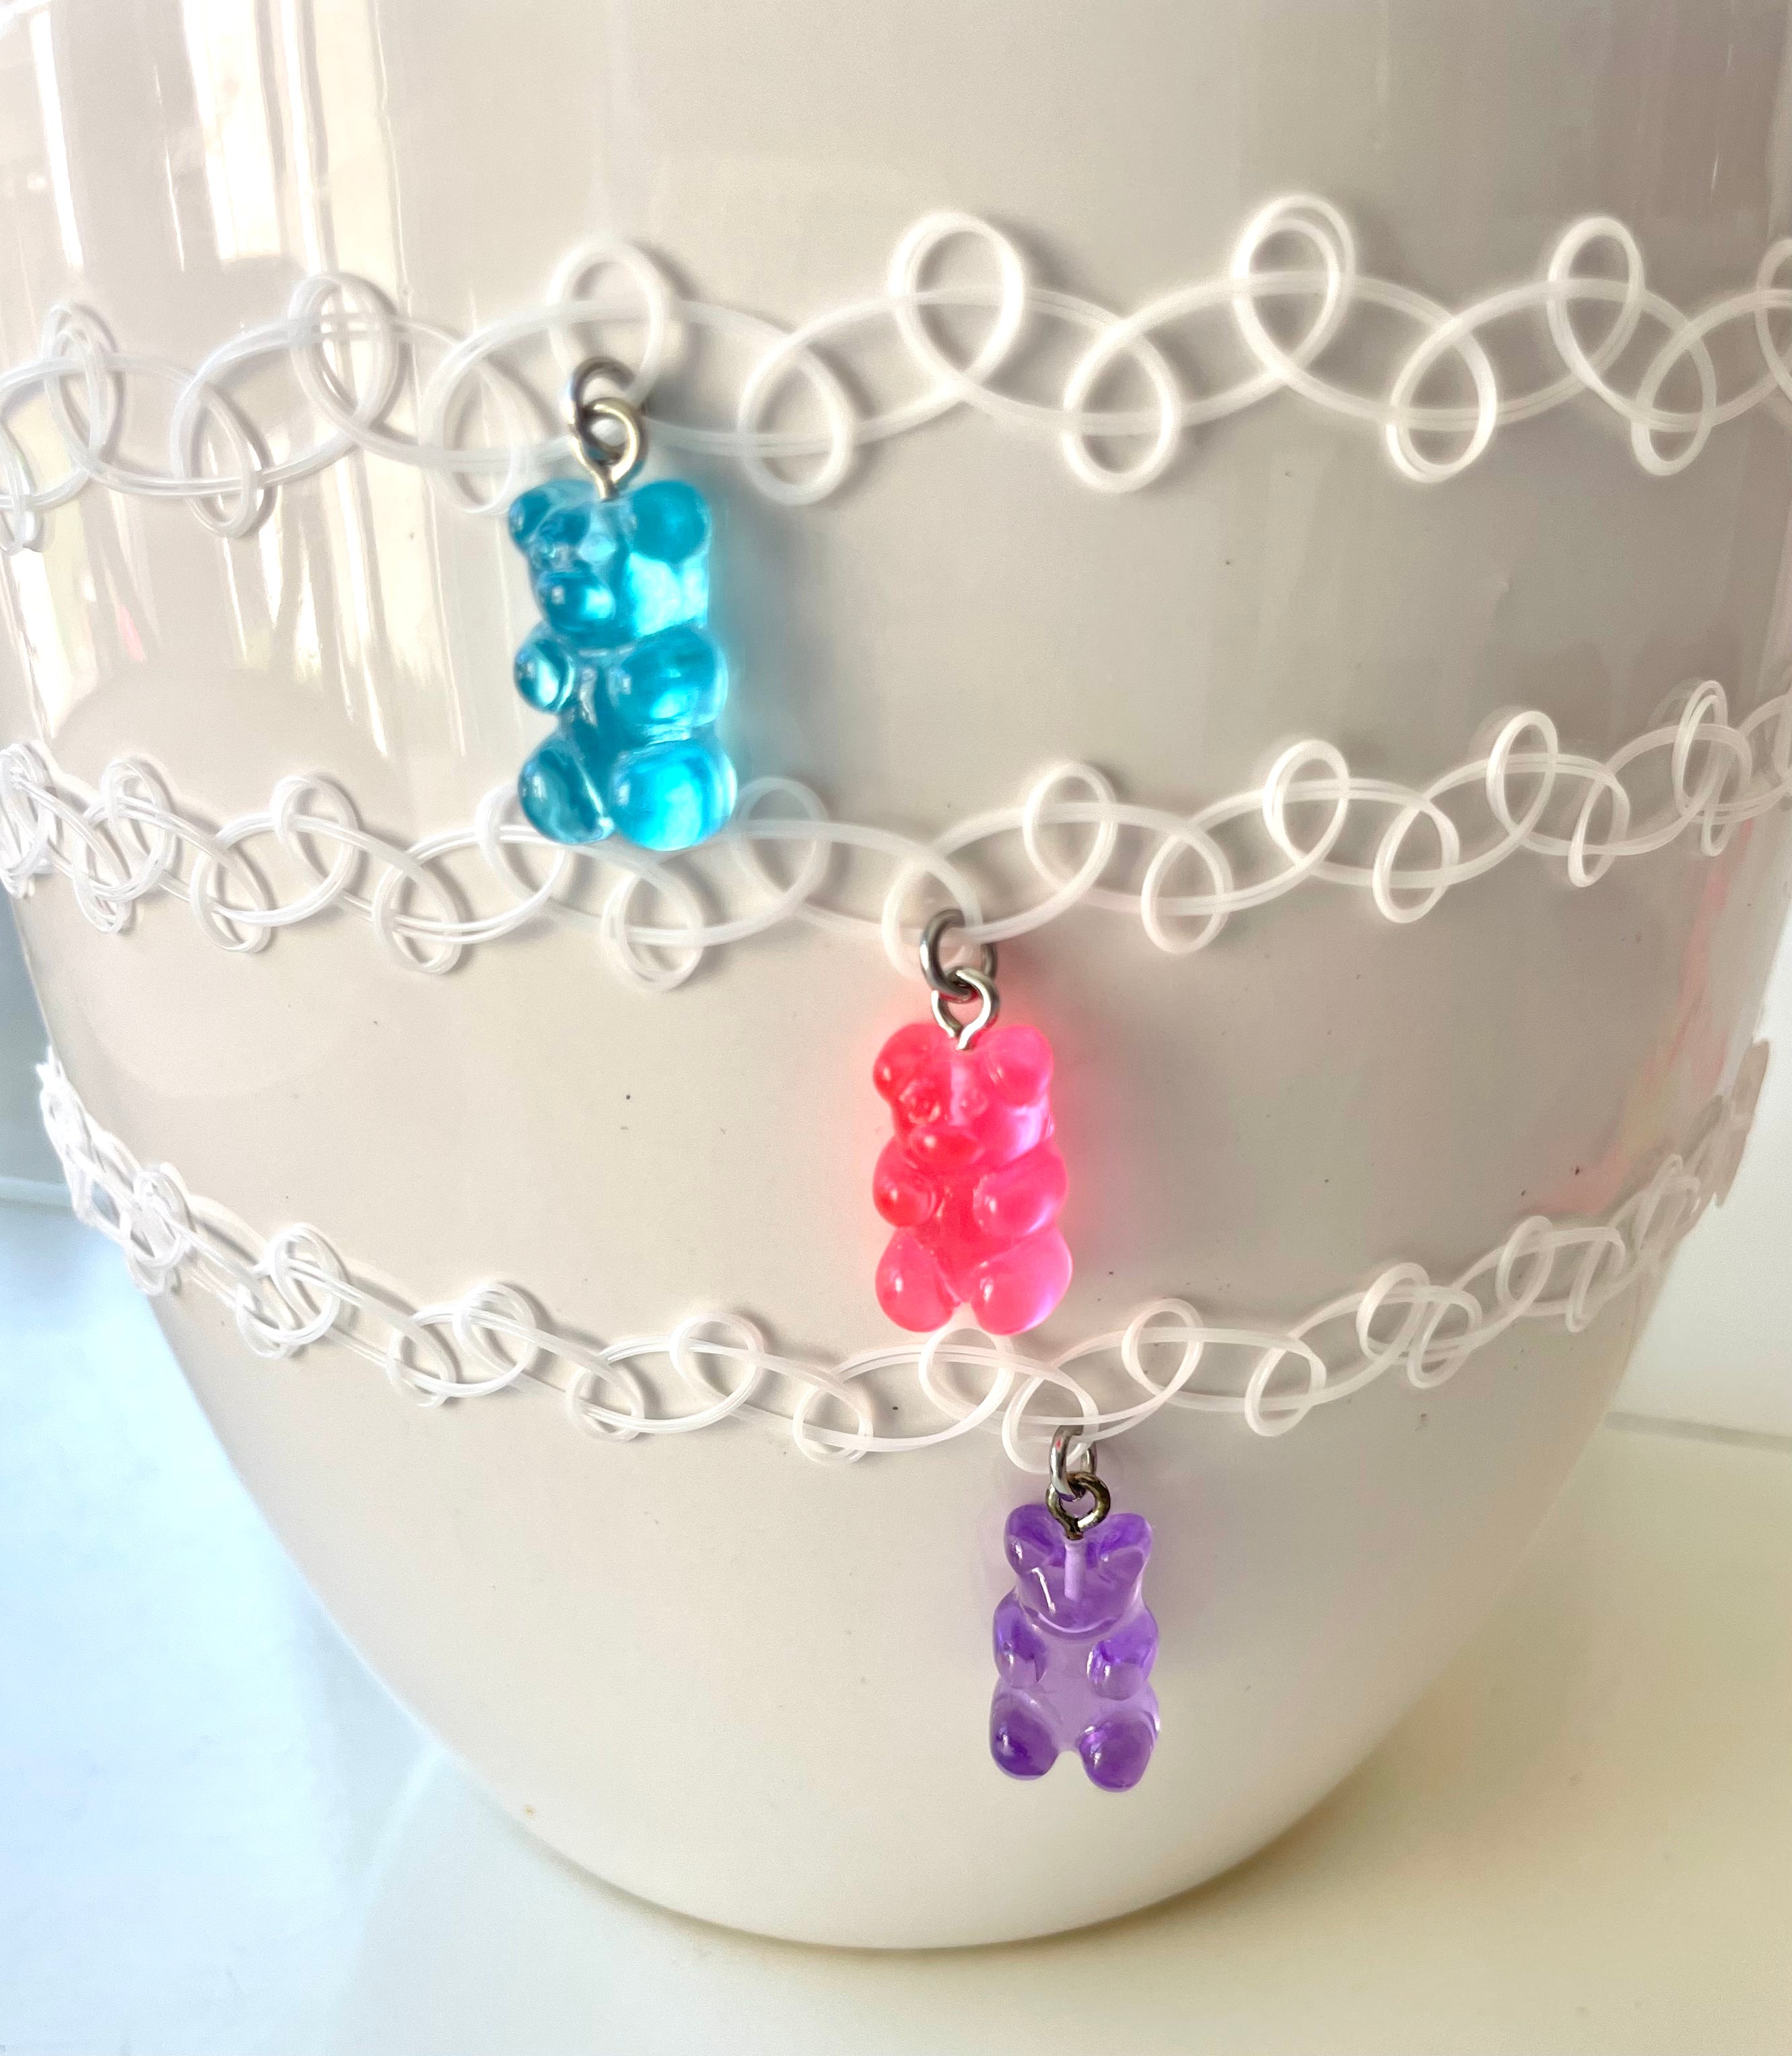 Choker with Gummy Bear Necklace